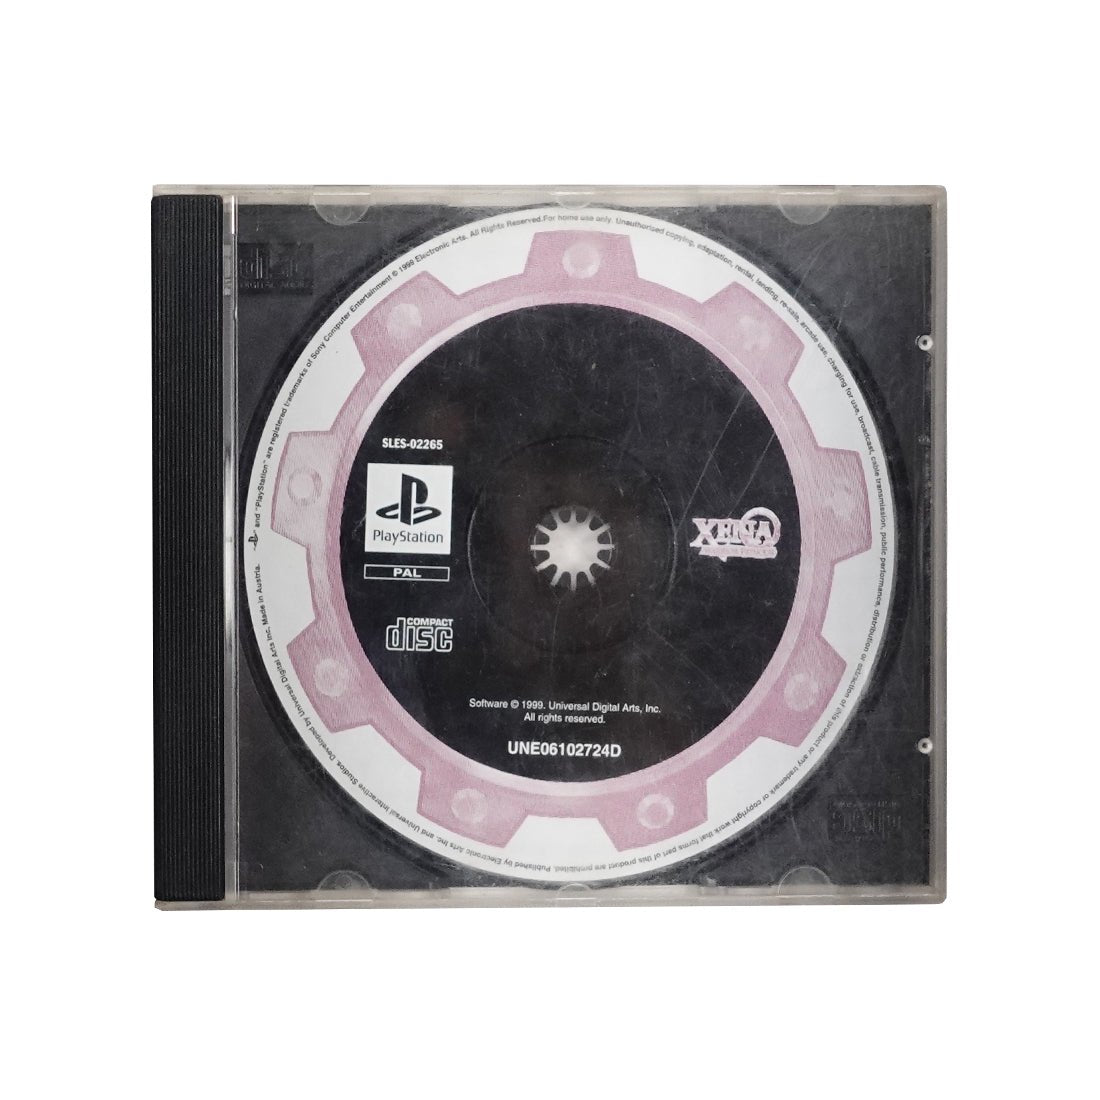 (Pre-Owned) Xena: Warrior Princess - PlayStation 1 - Store 974 | ستور ٩٧٤